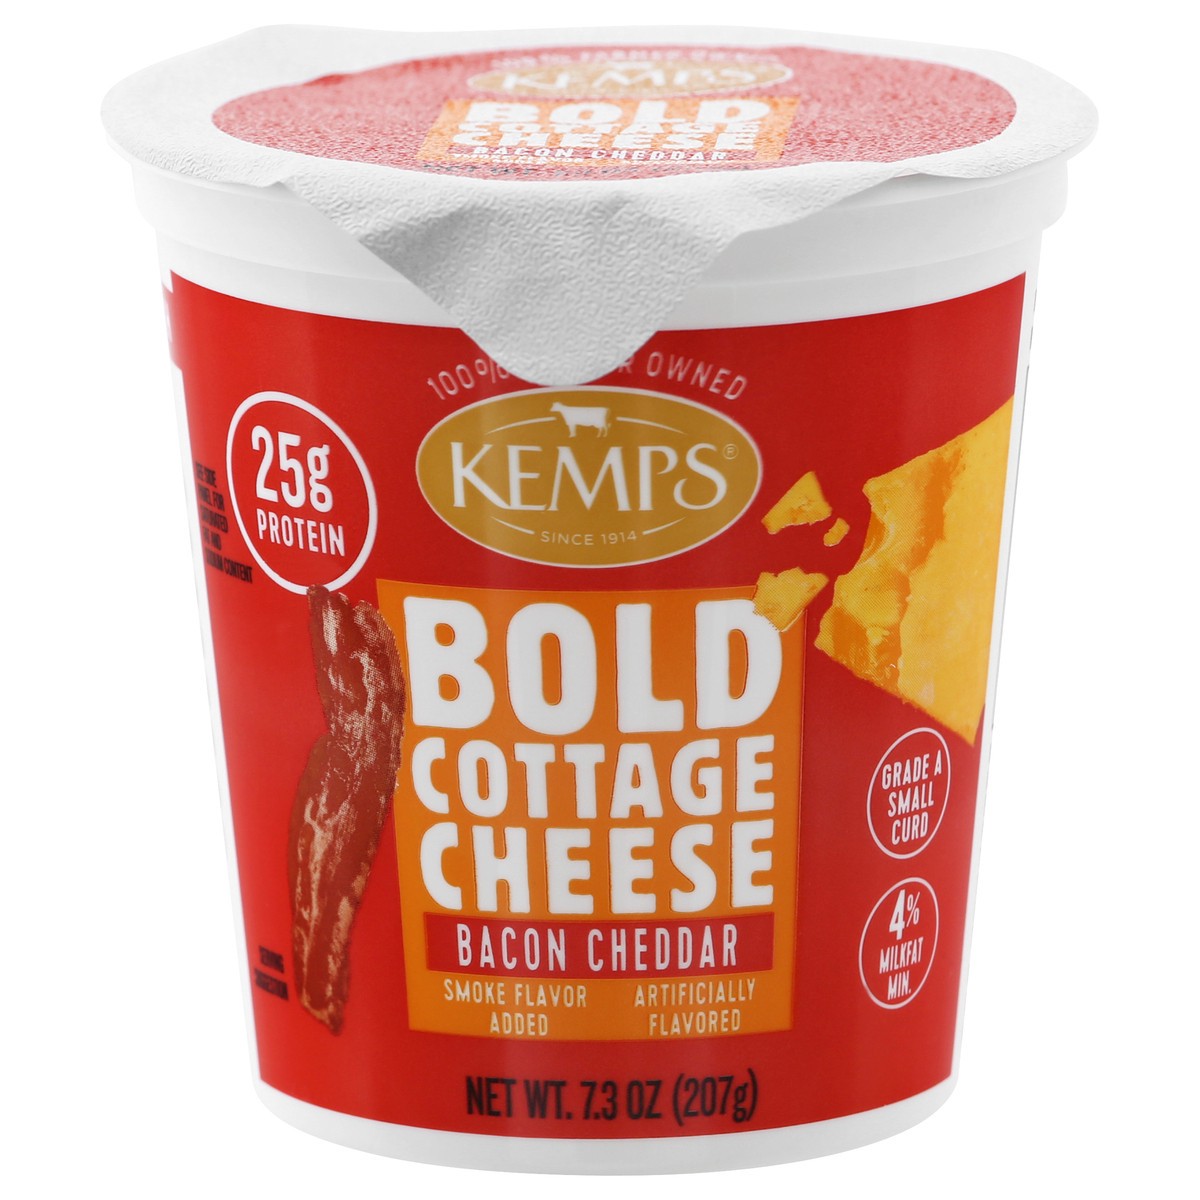 slide 7 of 13, Kemps Small Curd 4% Milkfat Min Bold Bacon Cheddar Cottage Cheese 7.3 oz, 7.3 oz